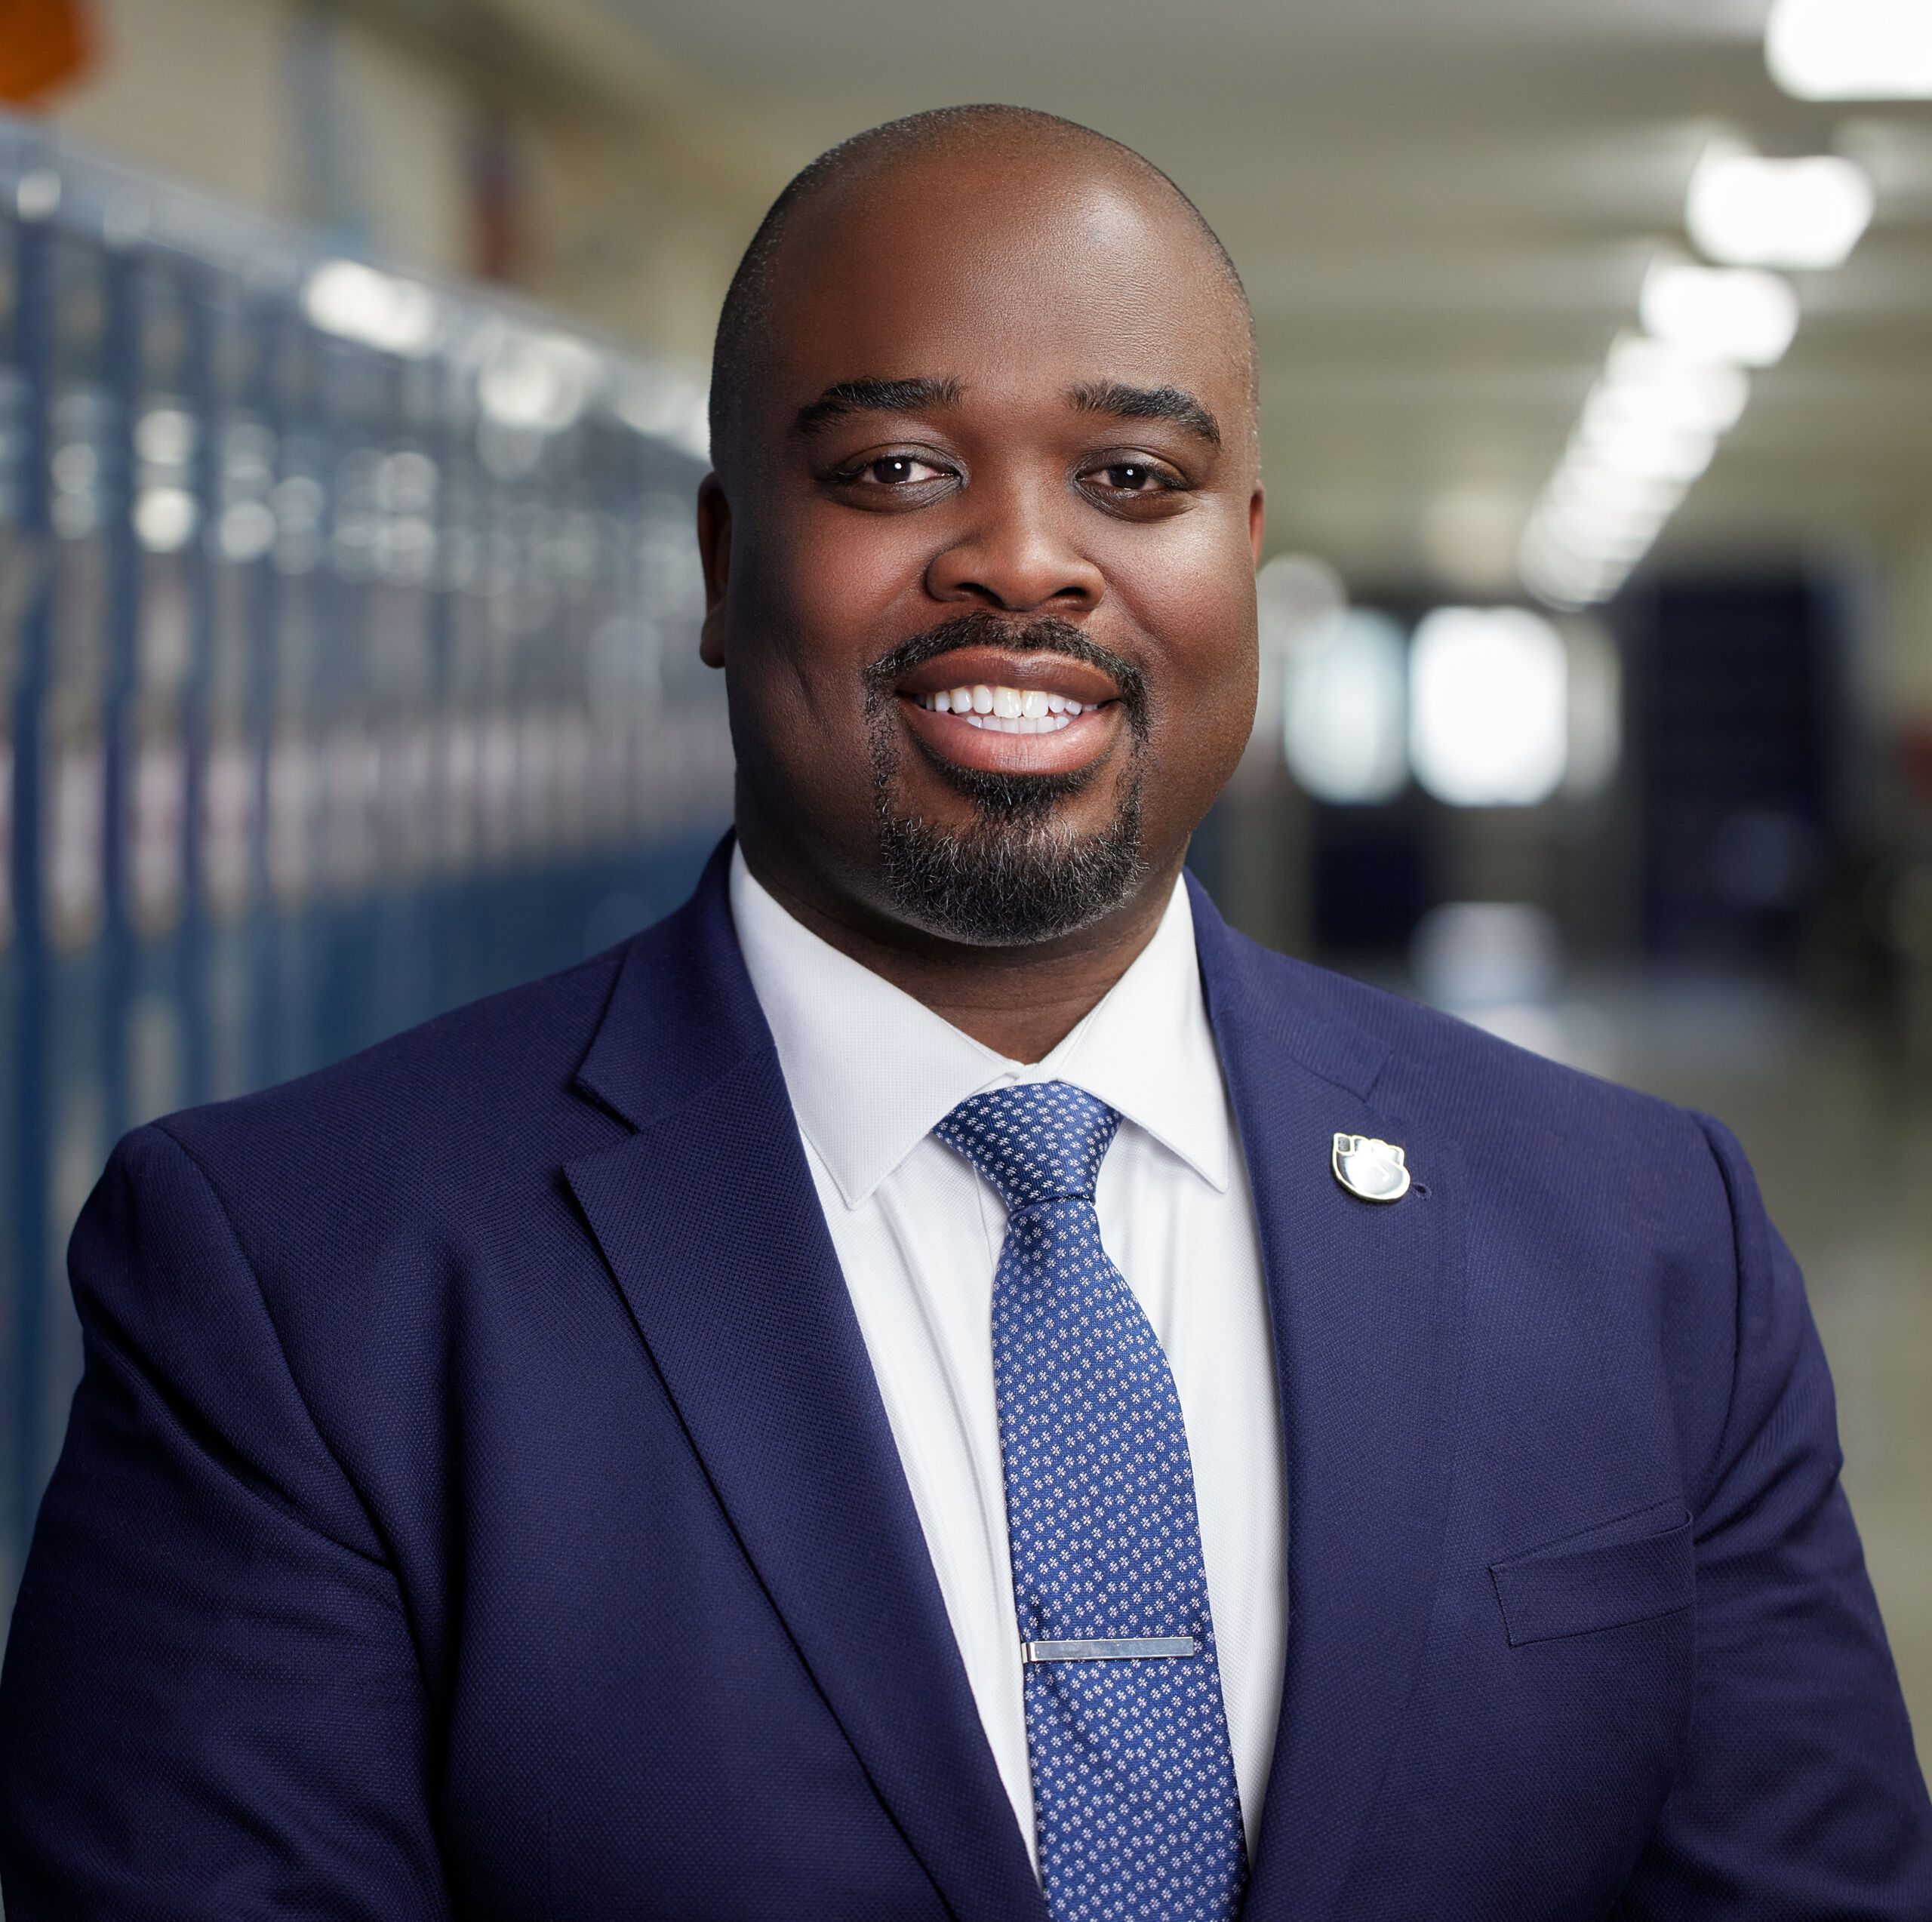 Photo is a professional headshot of Jonas Cleaves, principal of Johnson College Prep, in his school hallways. He is a Black man who is bald and is wearing a white button up shirt with a dark blue jacket and matching tie. He is smiling.